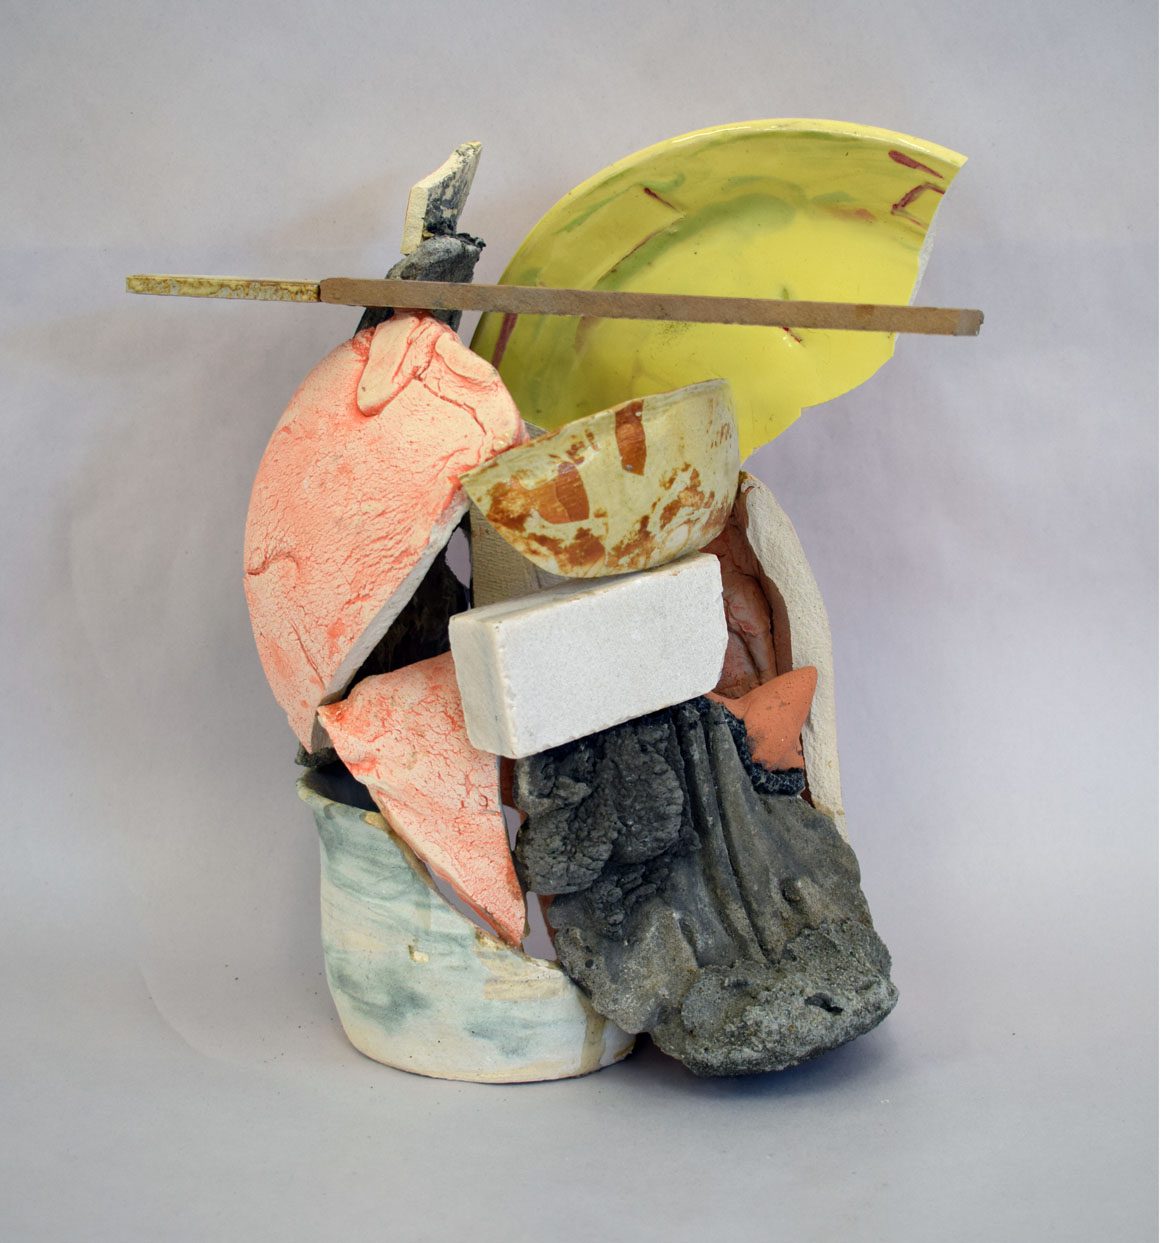 Anthea Williams, Standing Figure, 2020, Ceramic, cement, marble and adhesive, 27 x 12 x 20 cm, Courtesy of the artist.